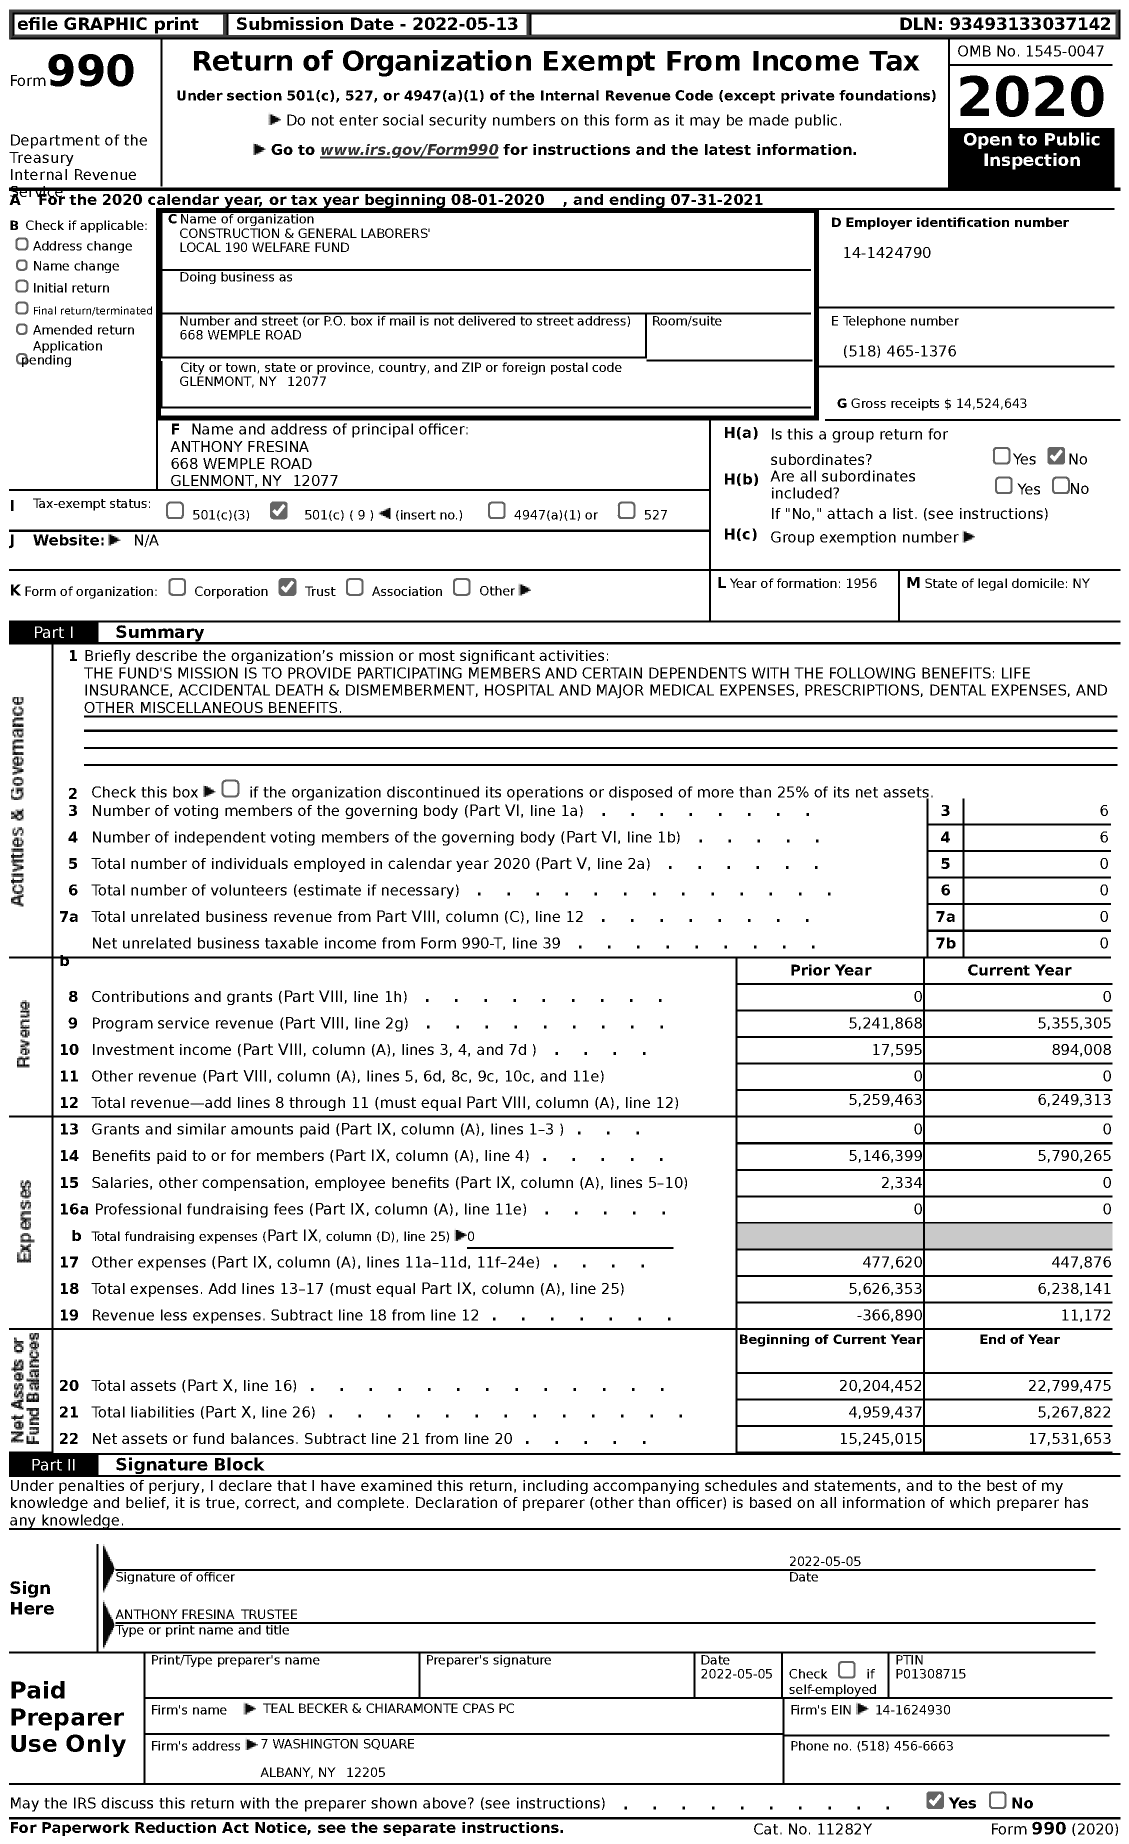 Image of first page of 2020 Form 990 for Construction and General Laborers' Local 190 Welfare Fund